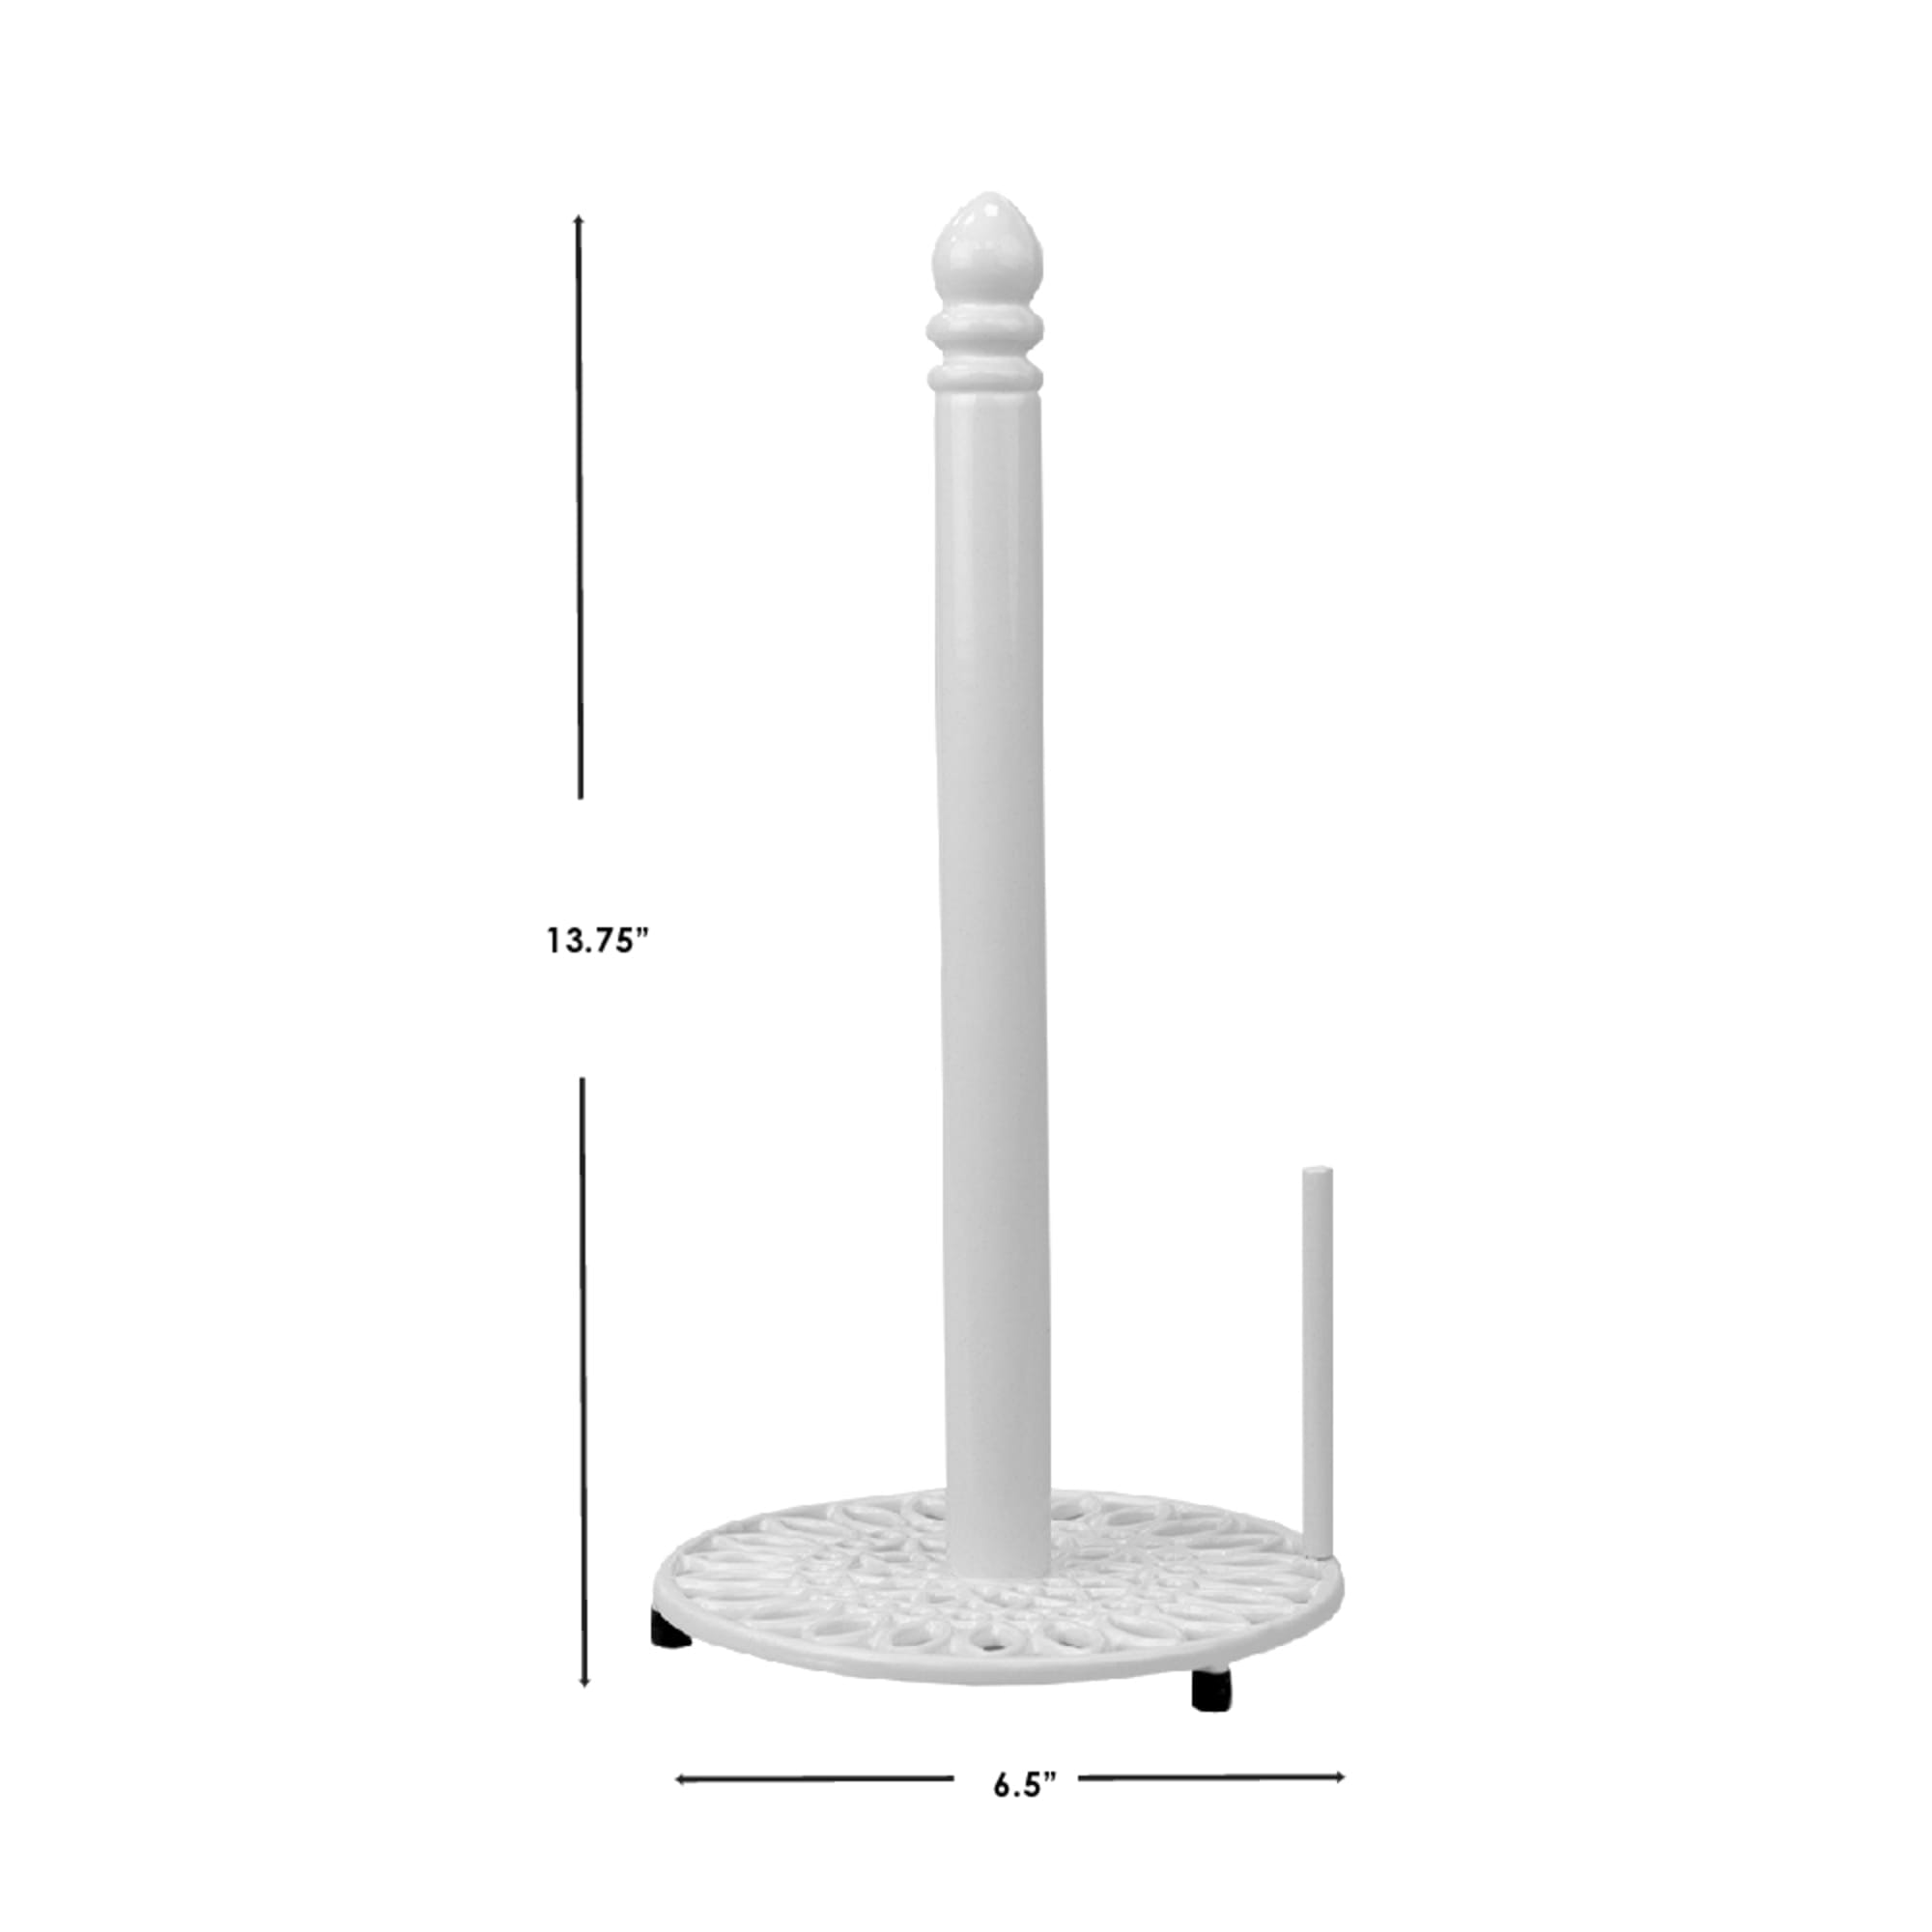 Home Basics Sunflower Heavy Weight Cast Iron Free Standing Paper Towel Holder with Dispensing Side Bar, White $8.00 EACH, CASE PACK OF 3